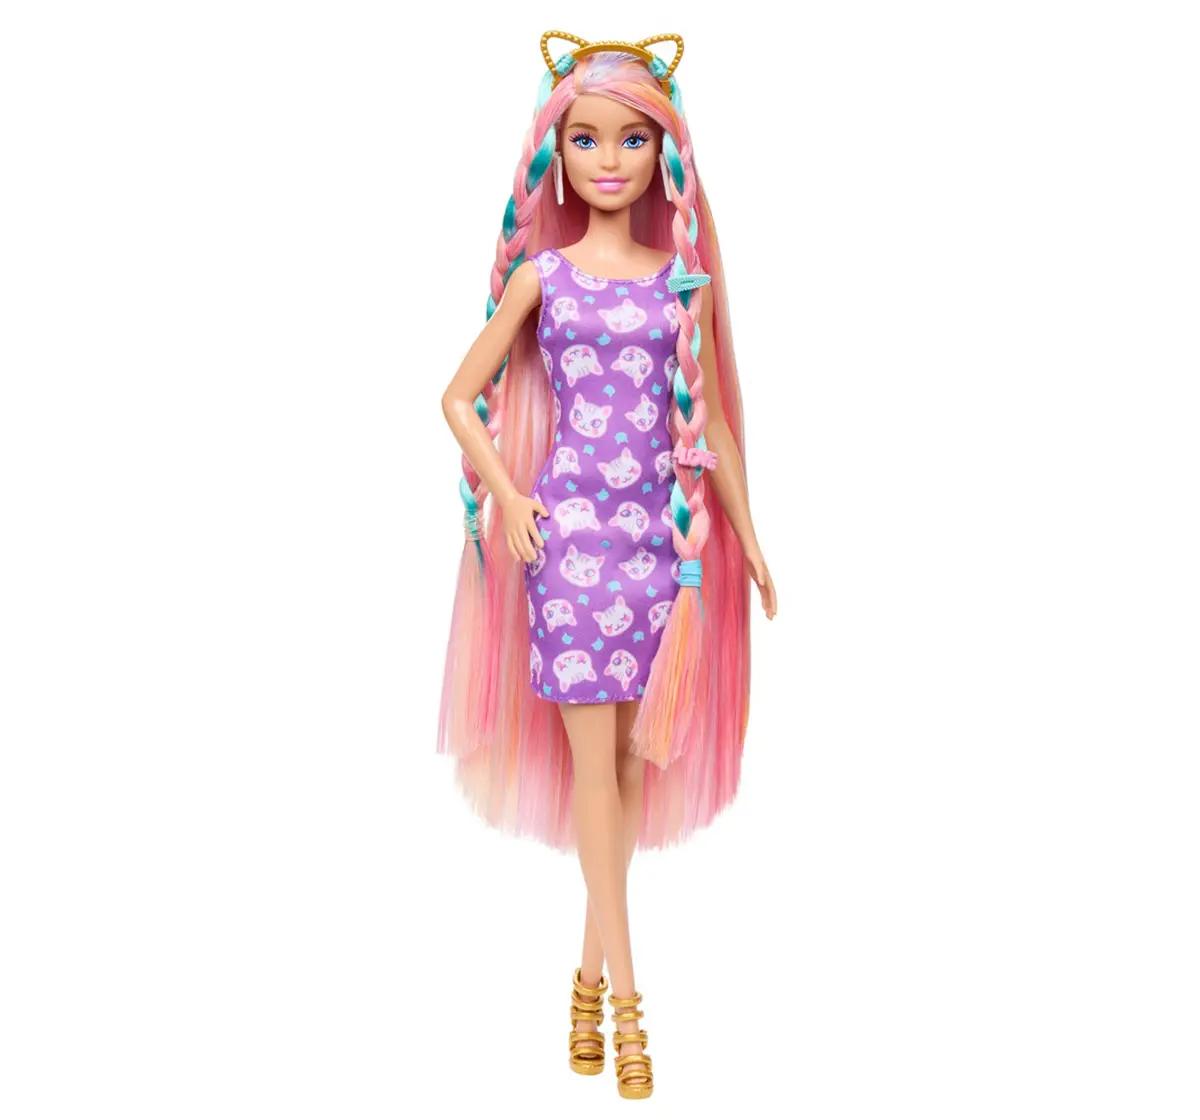 Barbie Totally Hair Doll, Assorted, 3Y+, Multicolour